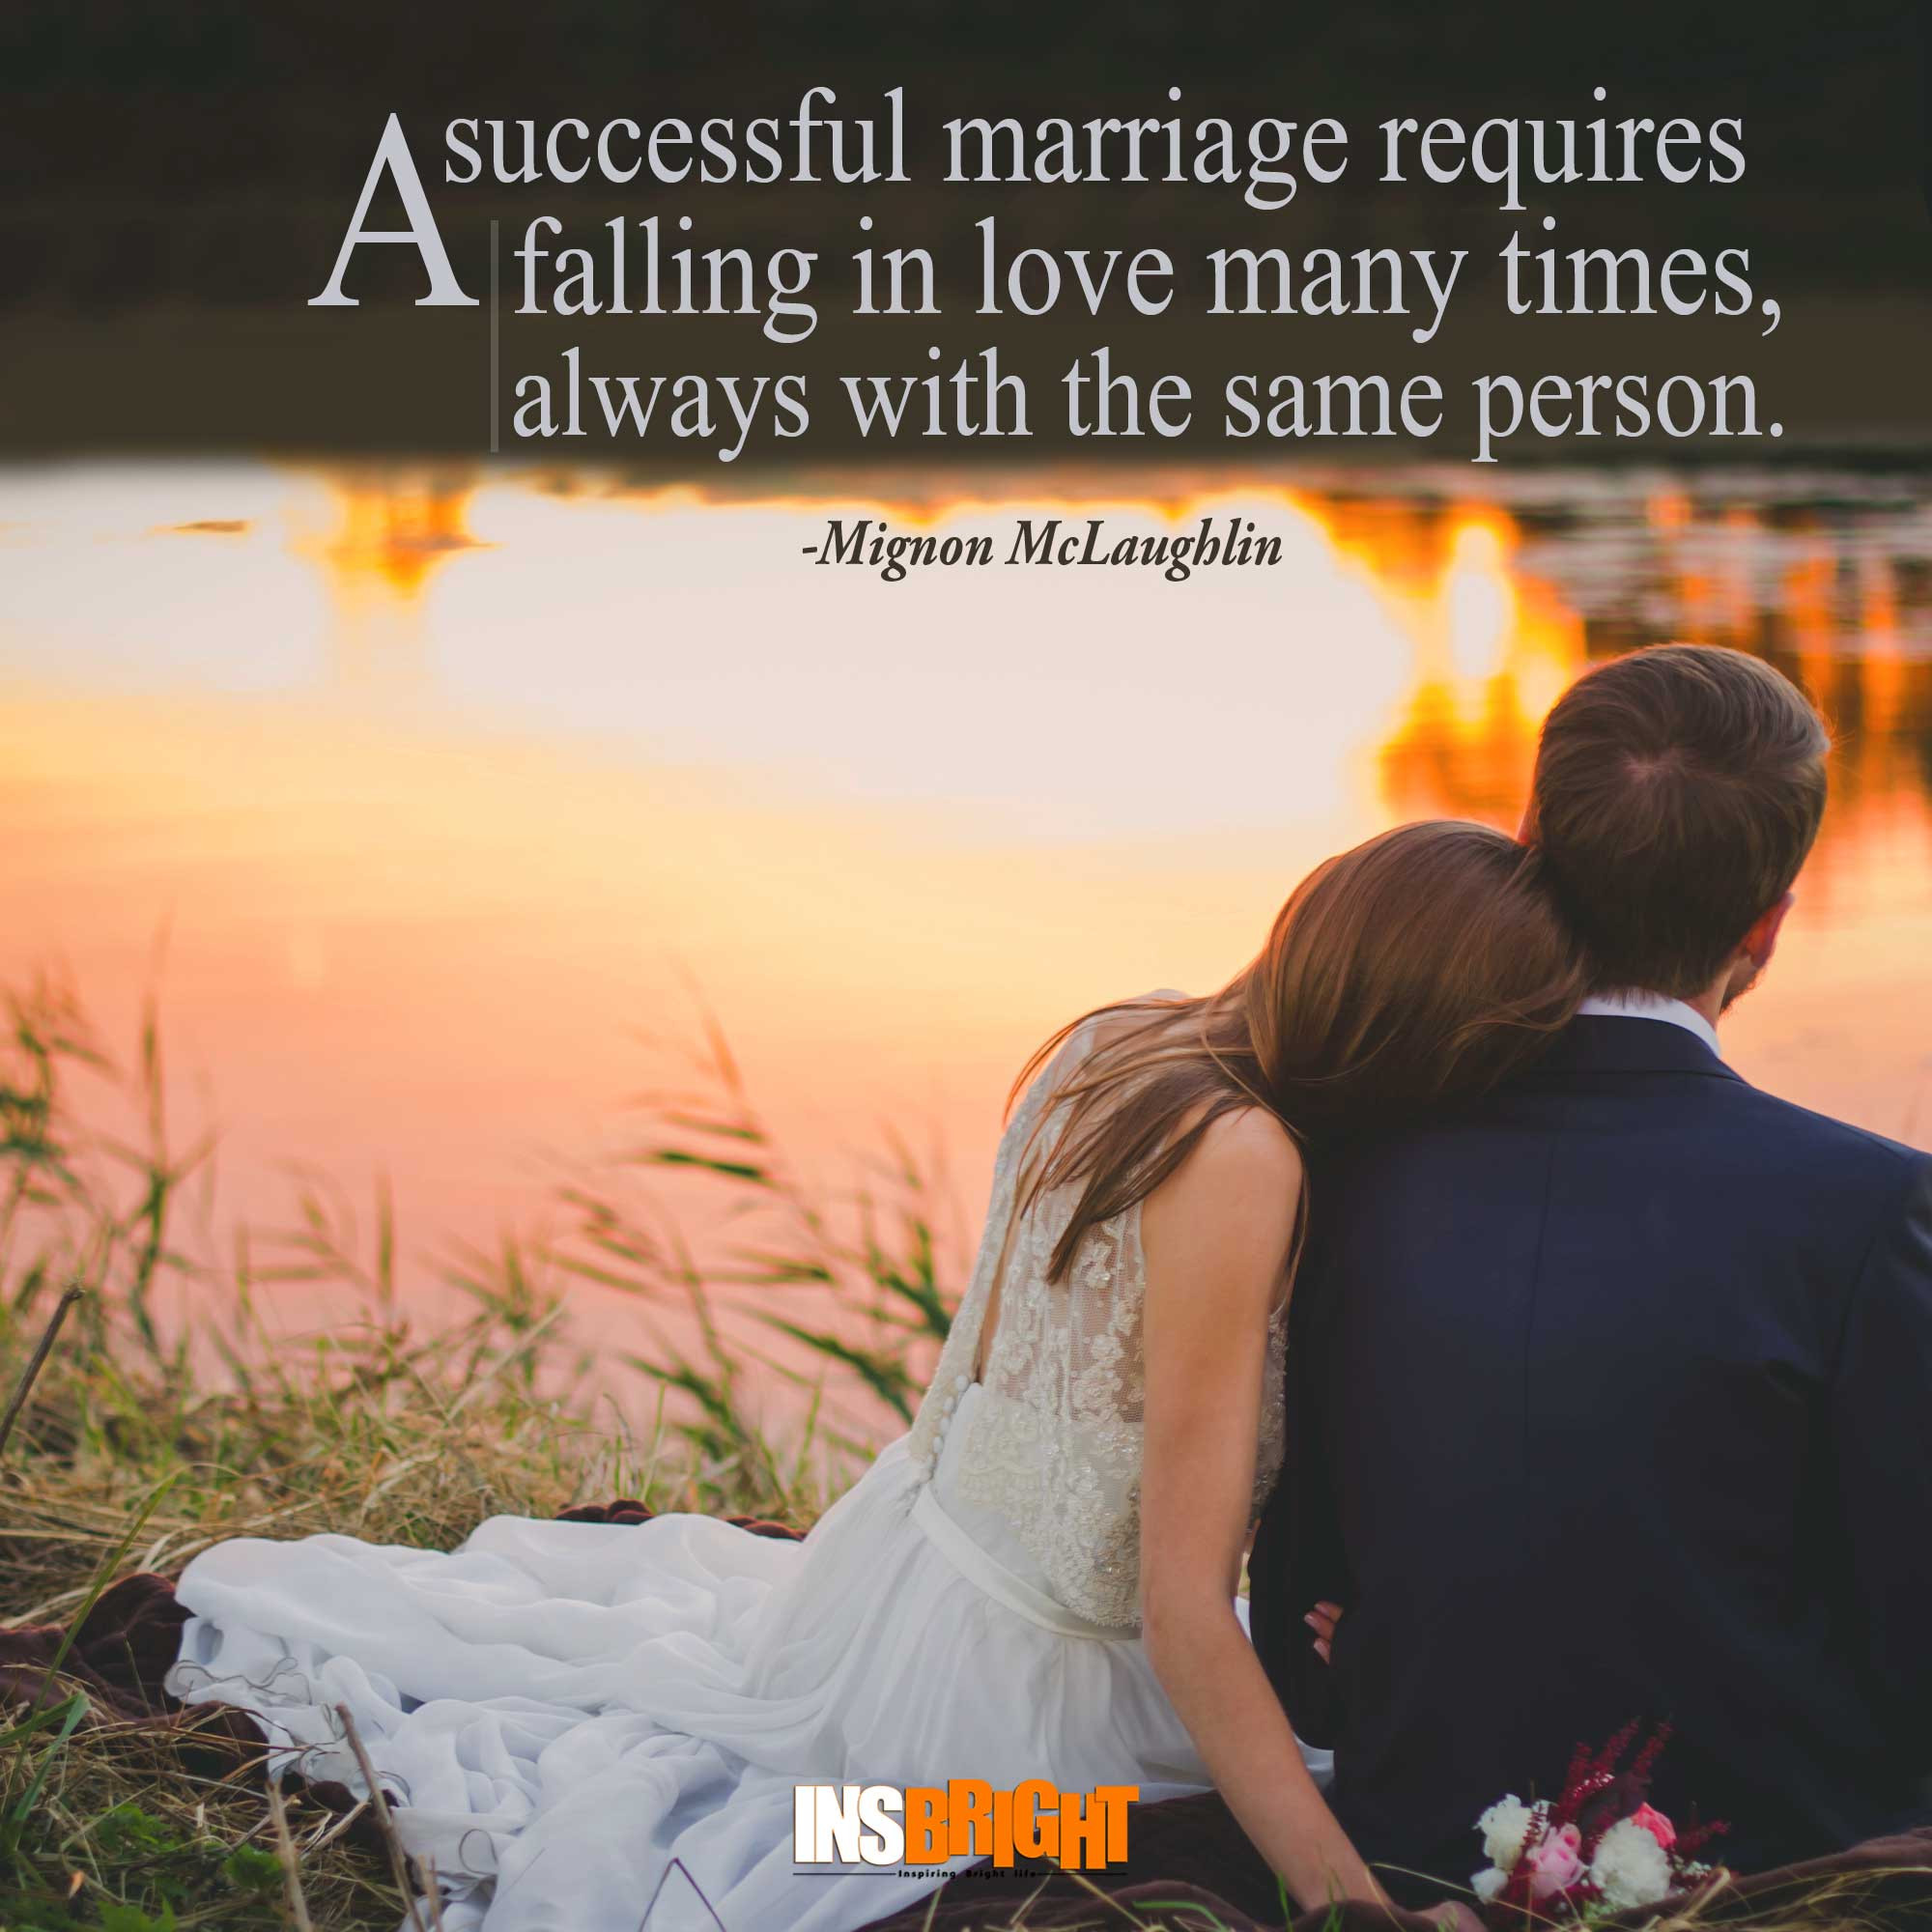 Encouraging Marriage Quotes
 Inspirational Marriage Quotes By Famous People With